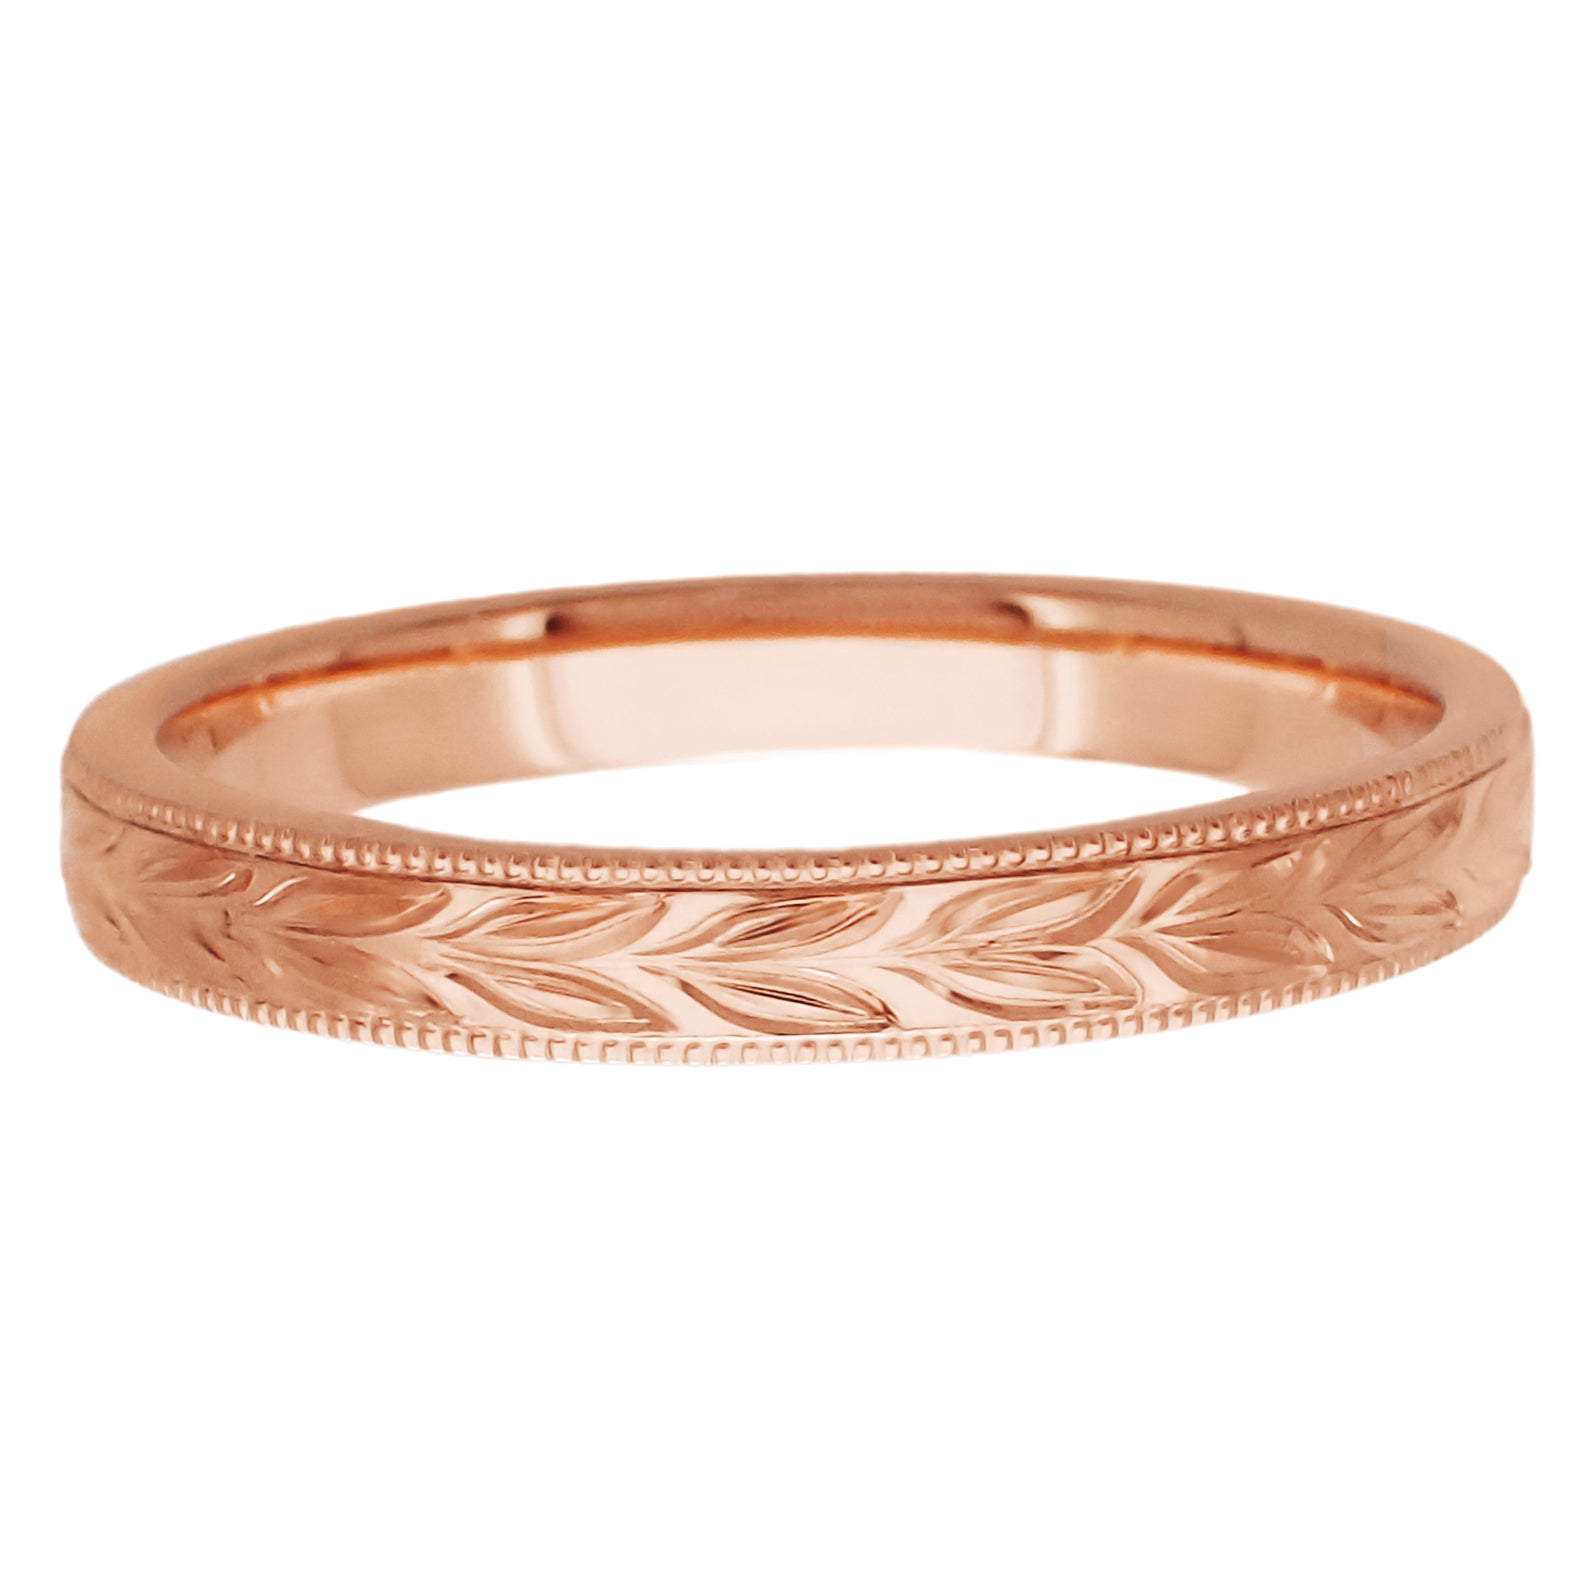 Antique Style Hand Engraved Hawaiian Maile Leaves Wedding Band in 14 Karat Rose Gold - 3mm Wide - Item: R719R - Image: 2